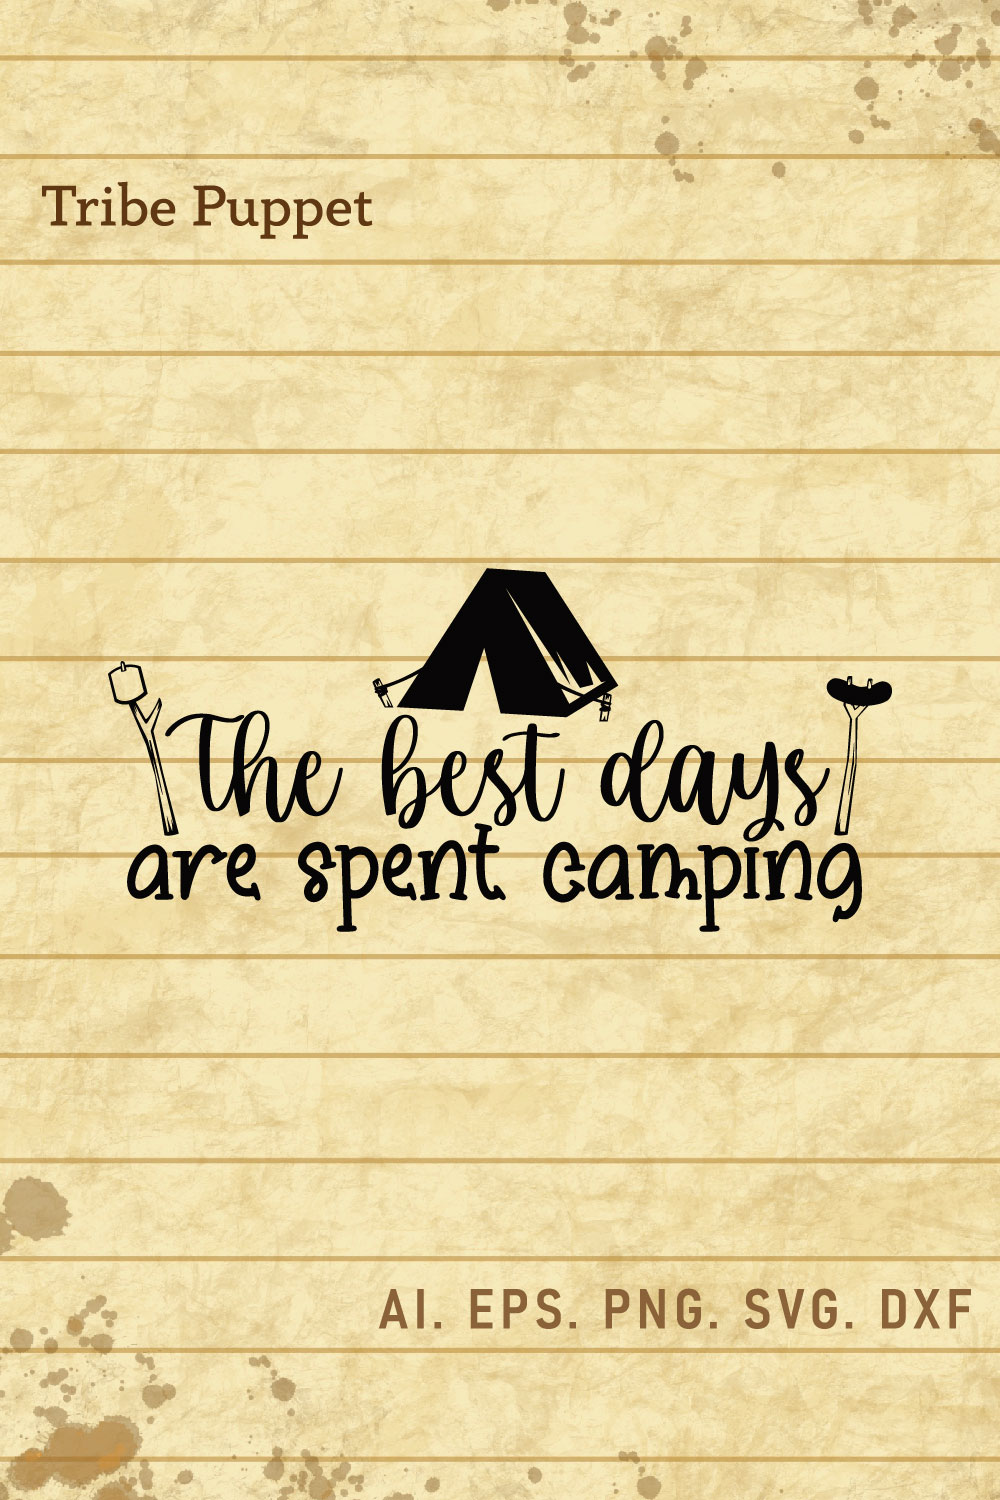 Night Camping Quotes pinterest preview image.